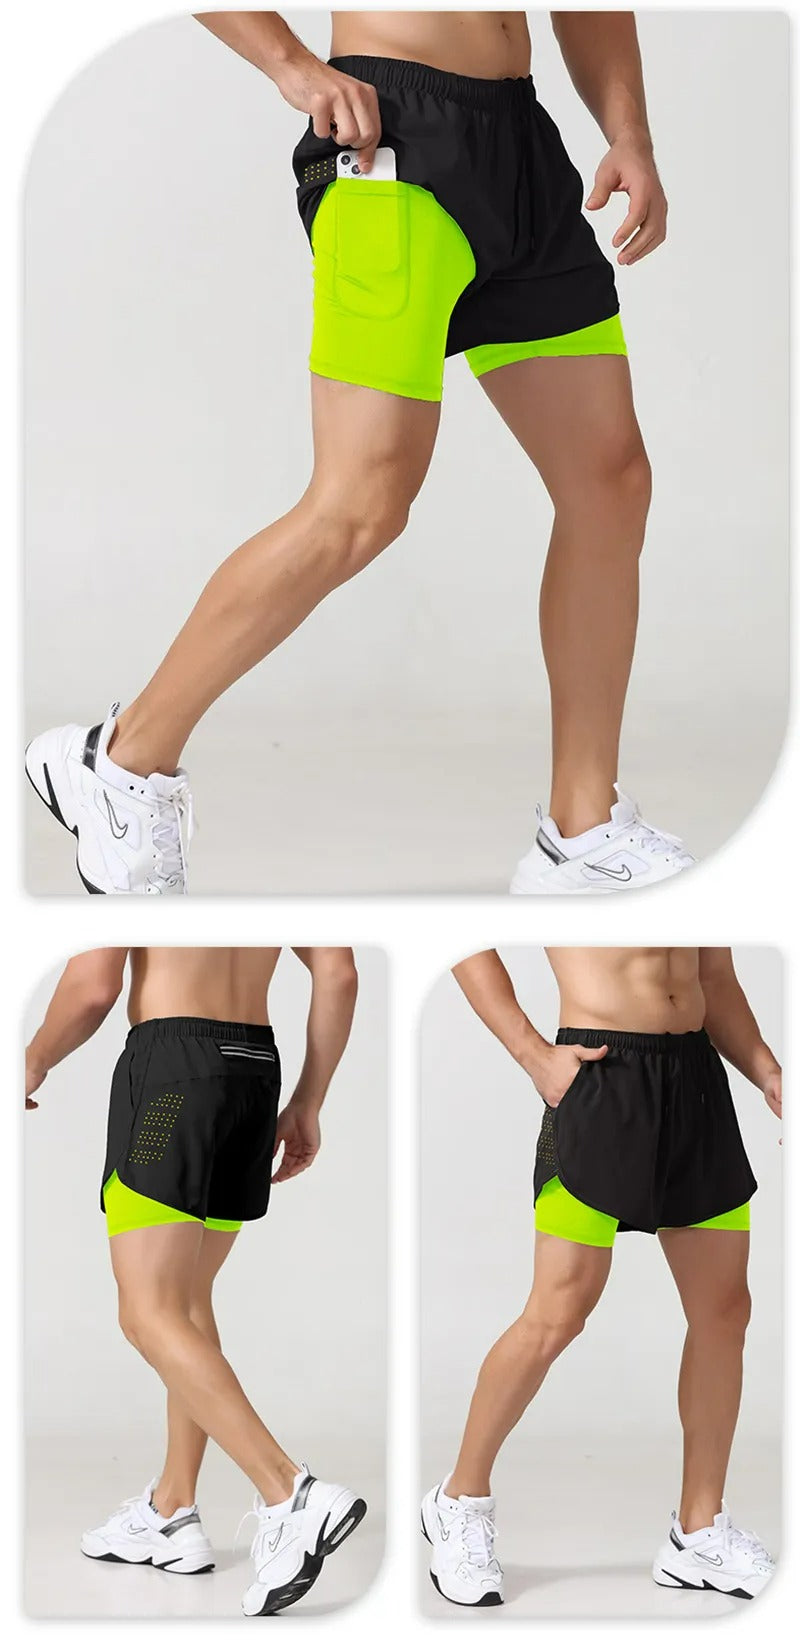 Men's Running Shorts Quick Drying Breathable Active Training Exercise Shorts |  DK22001